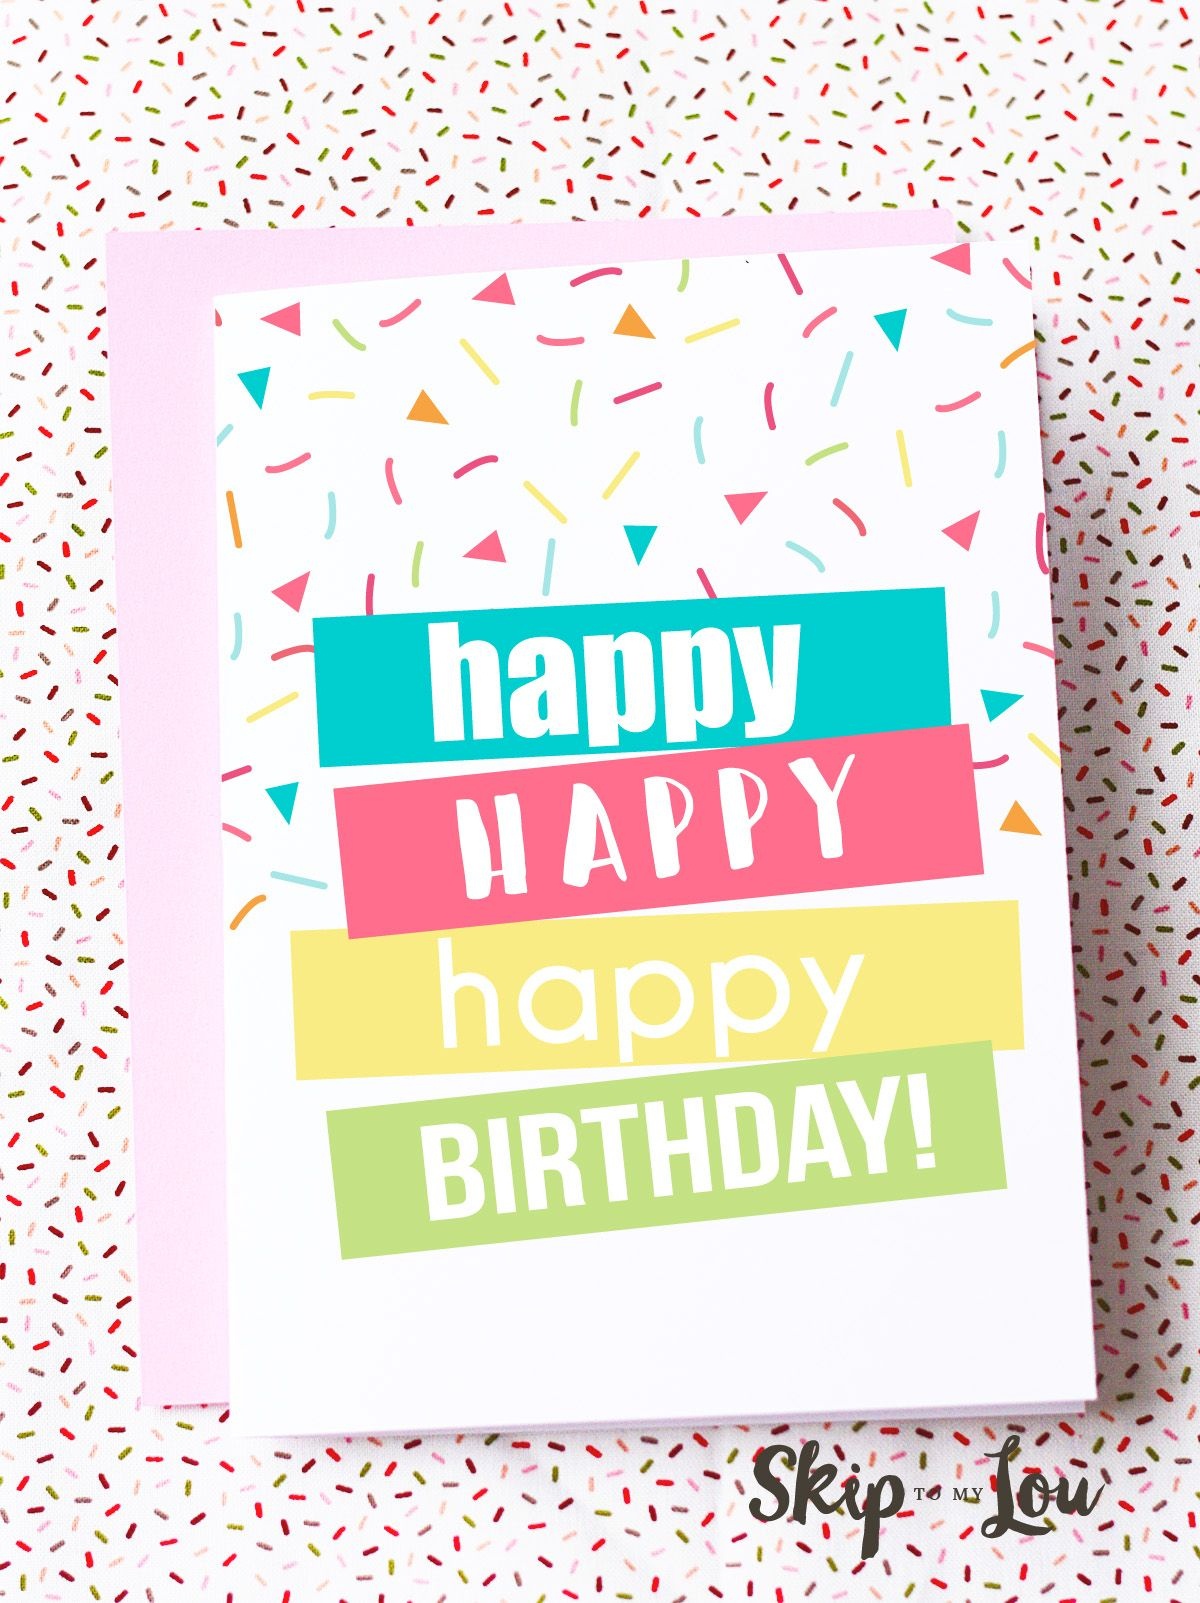 Free Printable Birthday Cards | Best Of Pinterest | Free Printable - Free Printable Birthday Cards For Your Best Friend